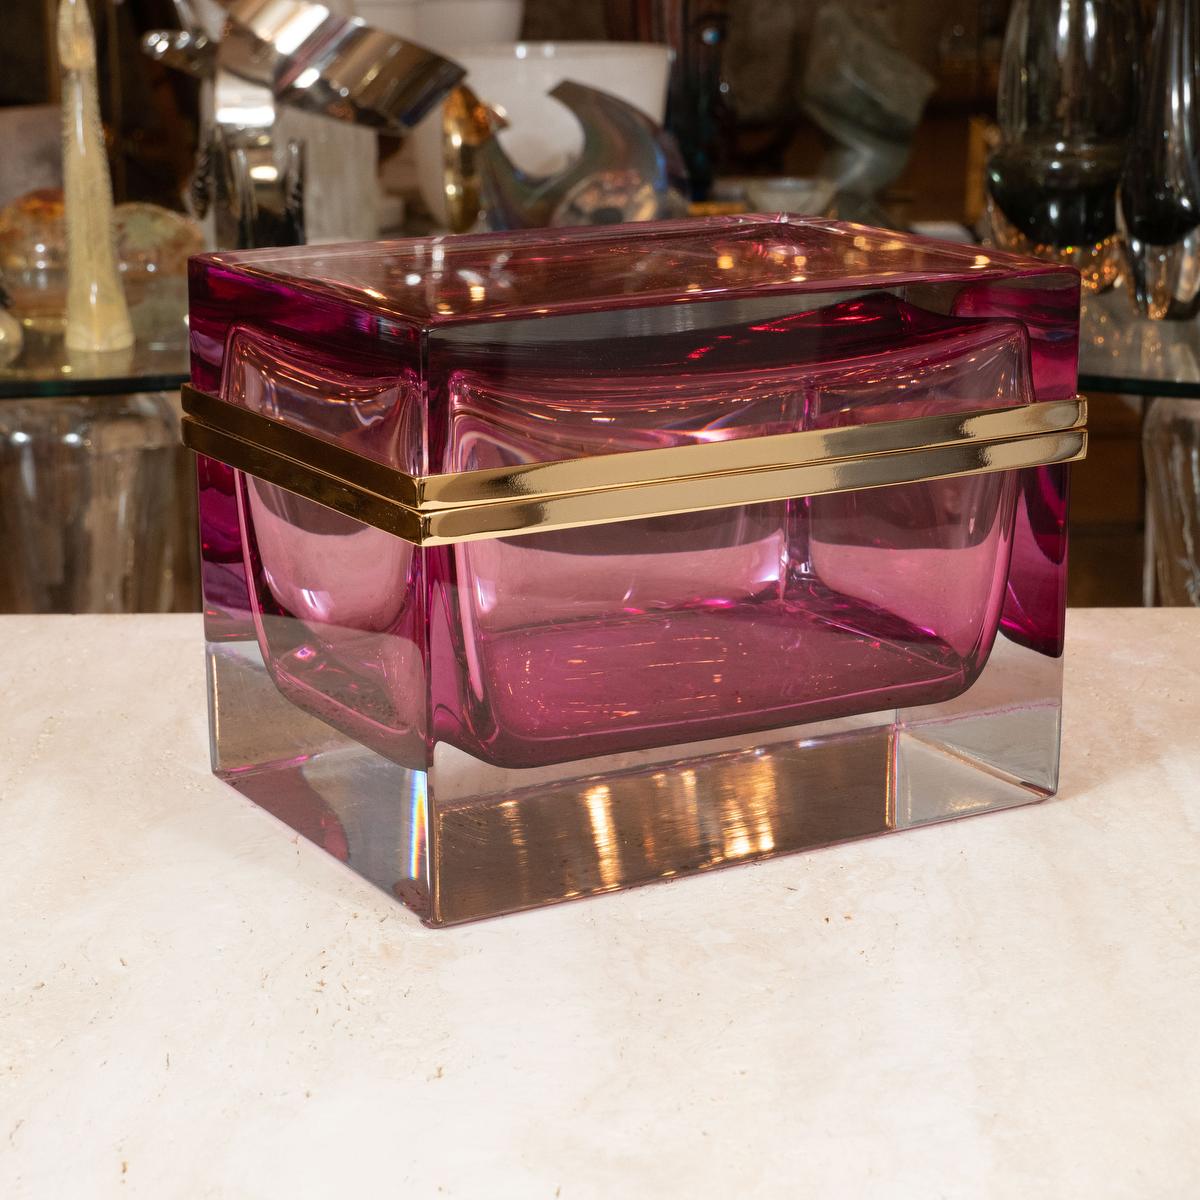 Monumental rectangular Murano glass box with pink sommerso core.